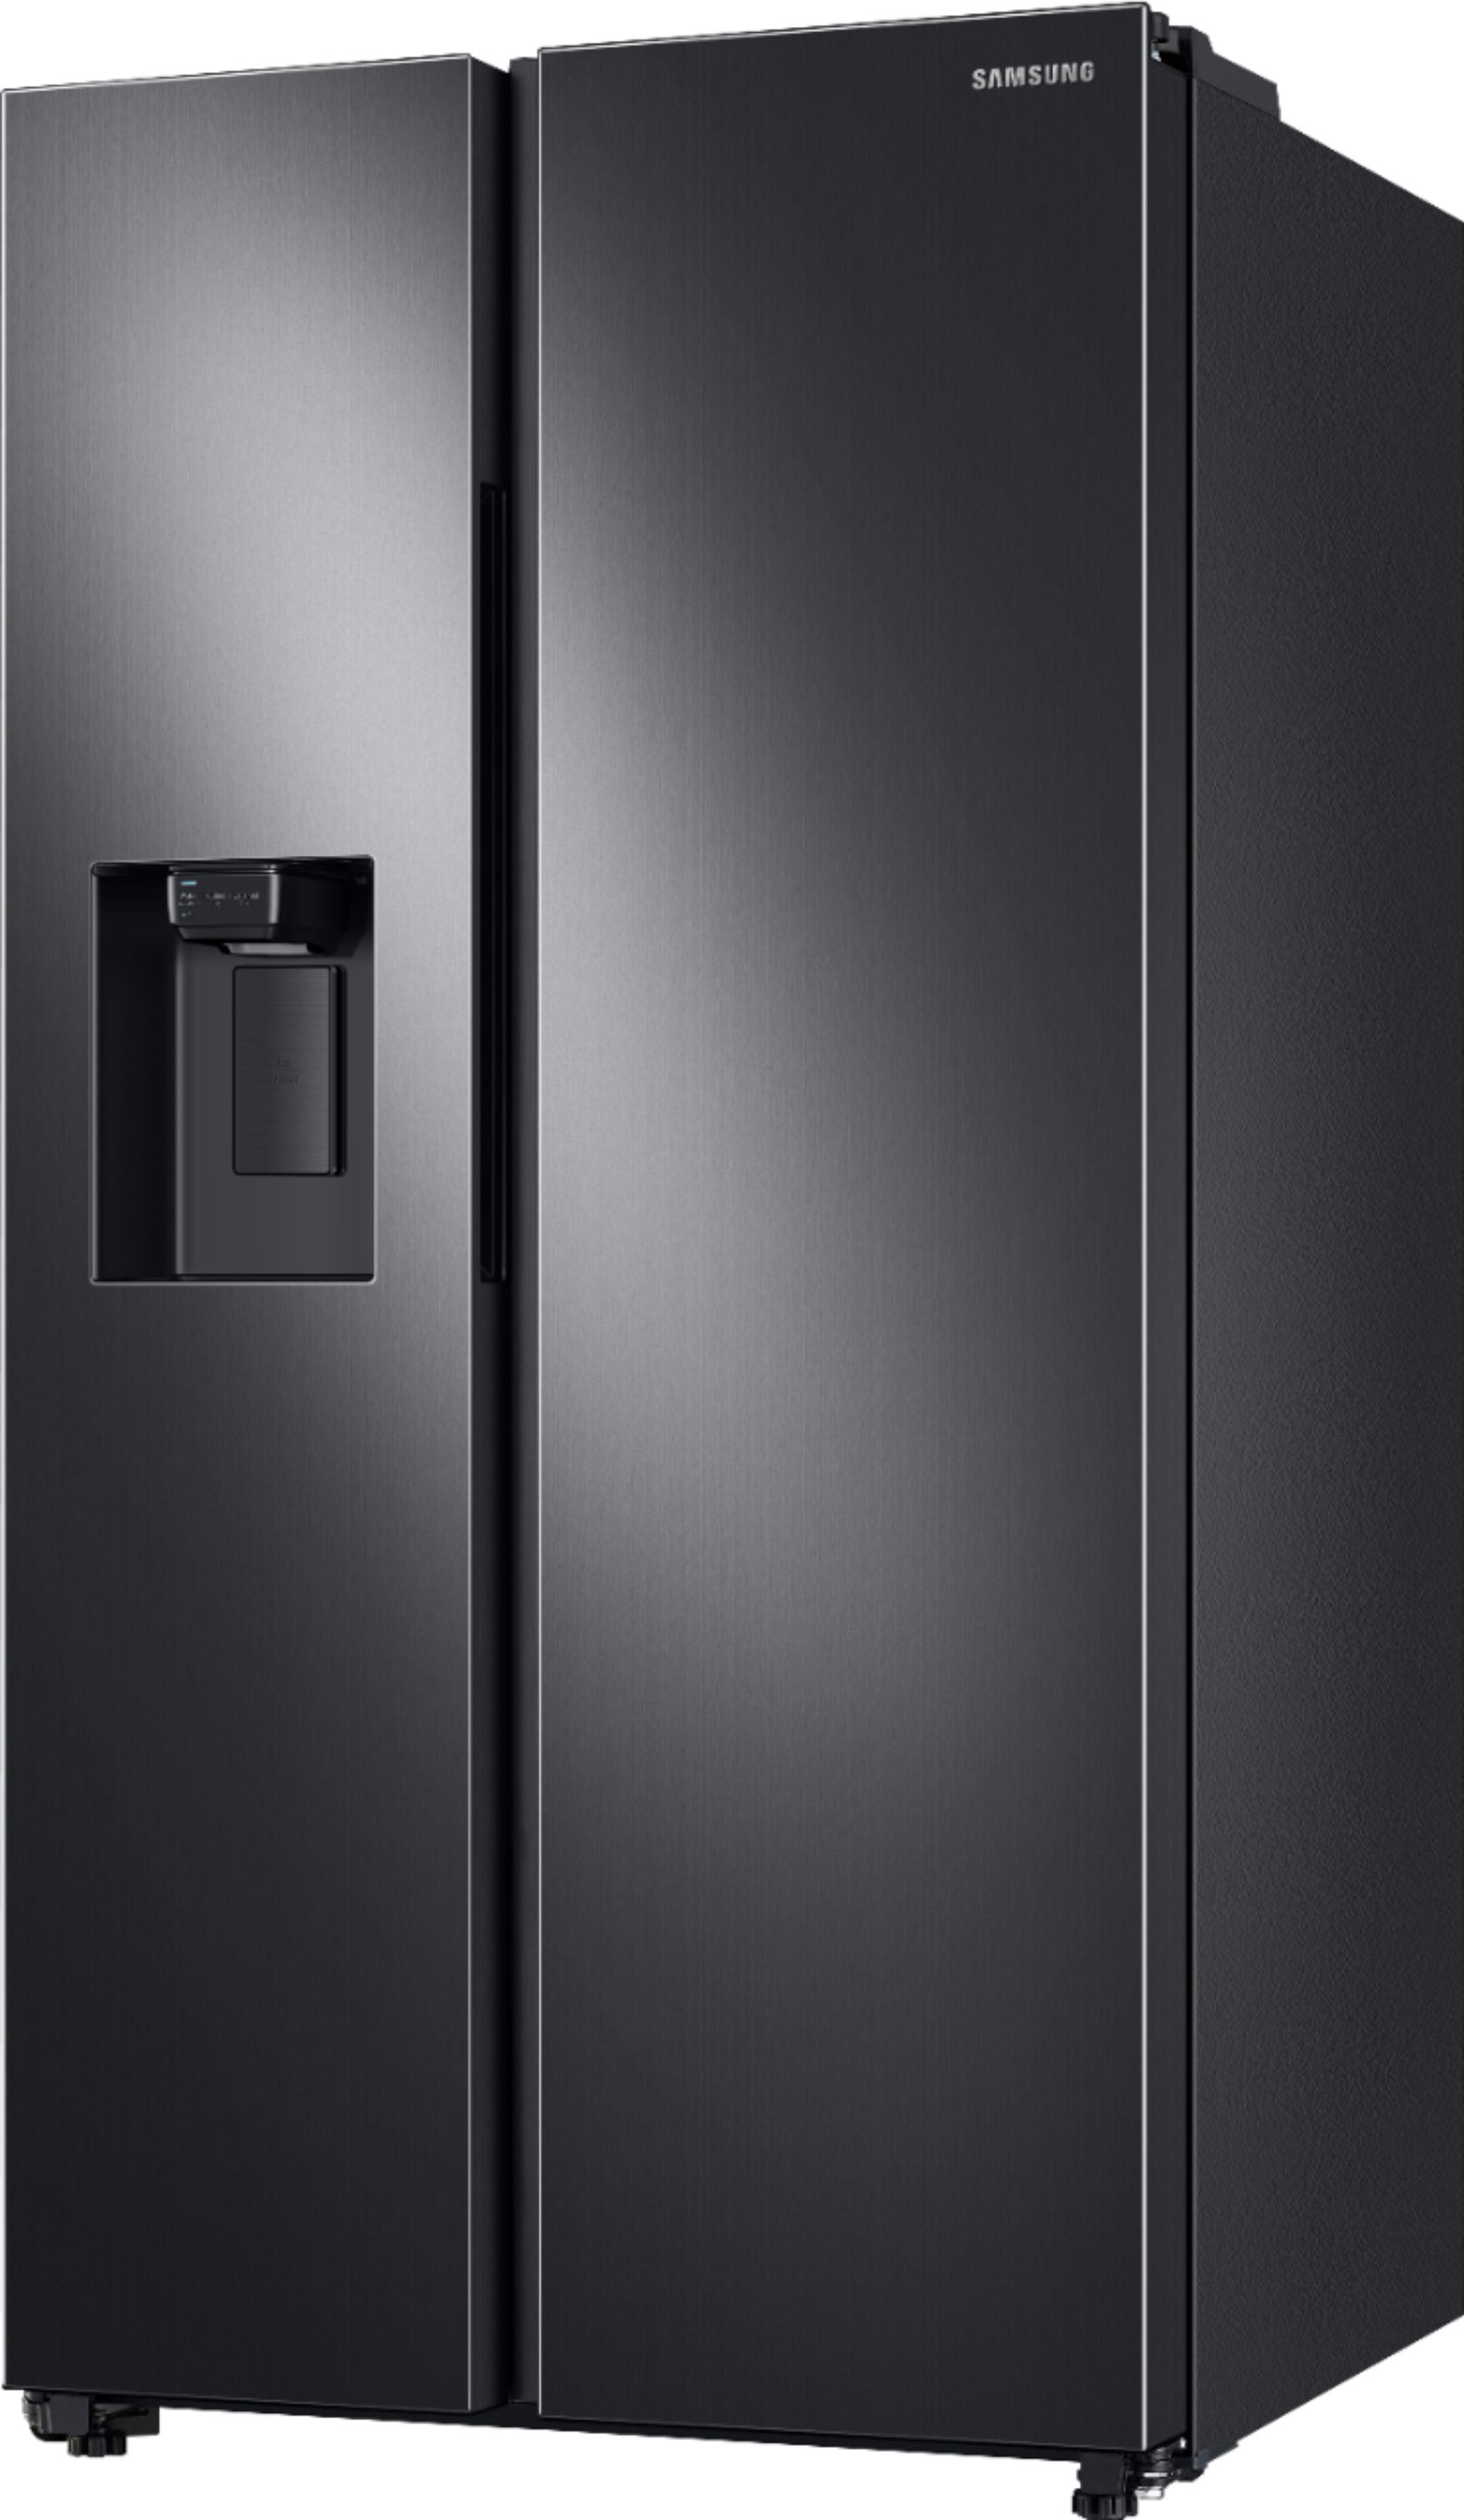 Questions and Answers: Samsung 27.4 cu. ft. Side-by-Side Refrigerator ...